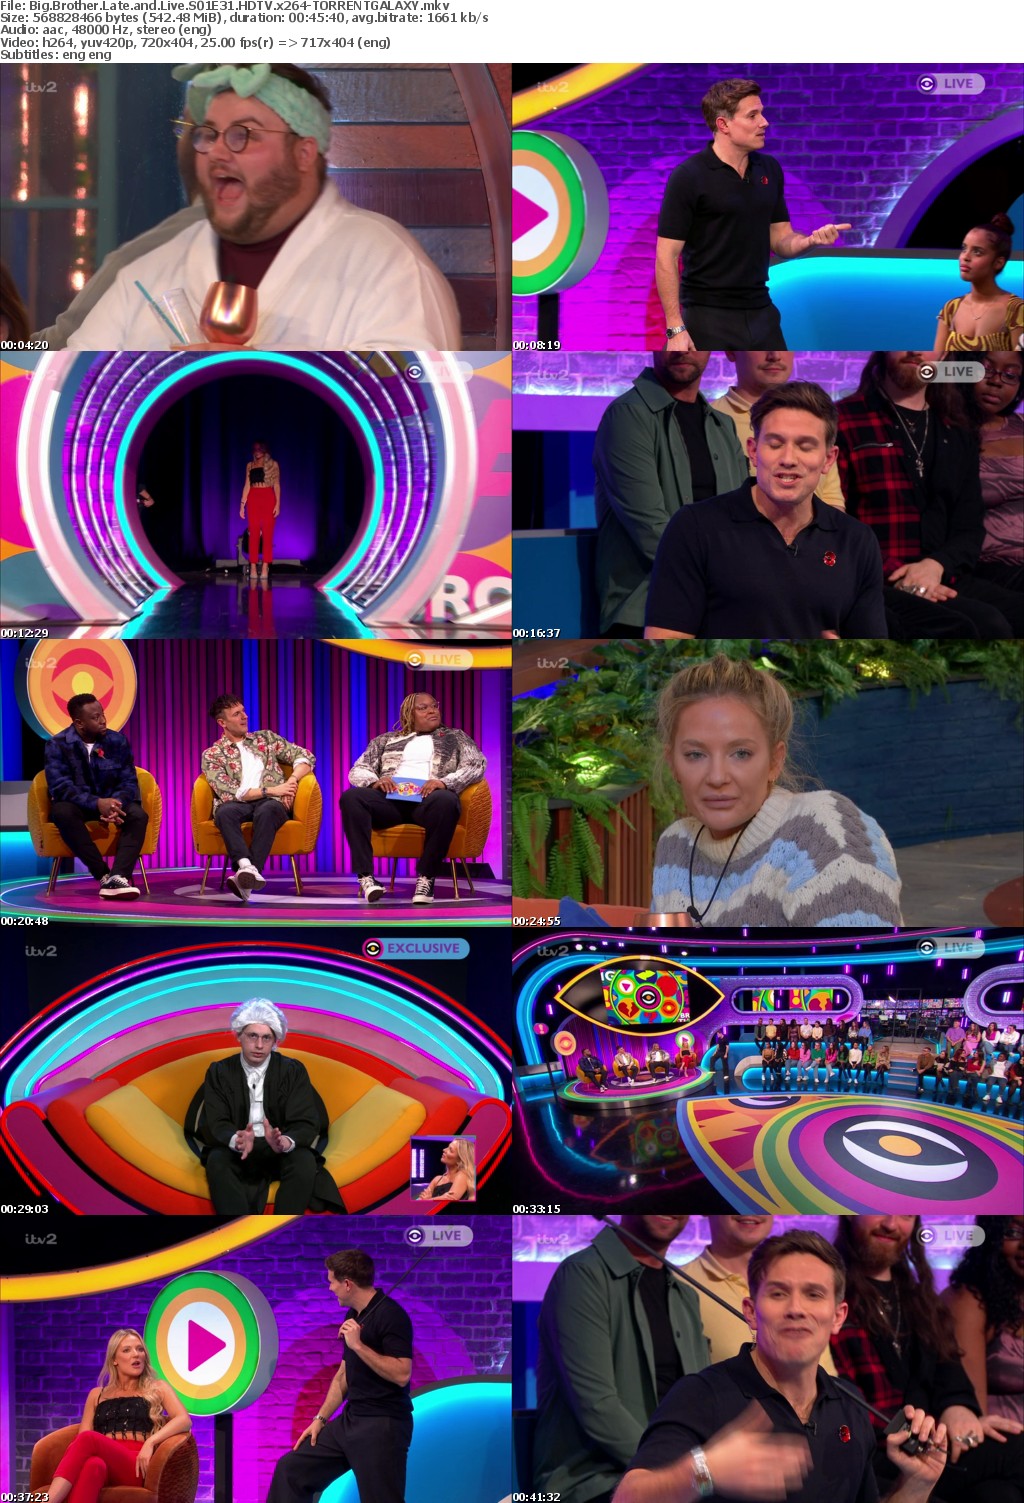 Big Brother Late and Live S01E31 HDTV x264-GALAXY